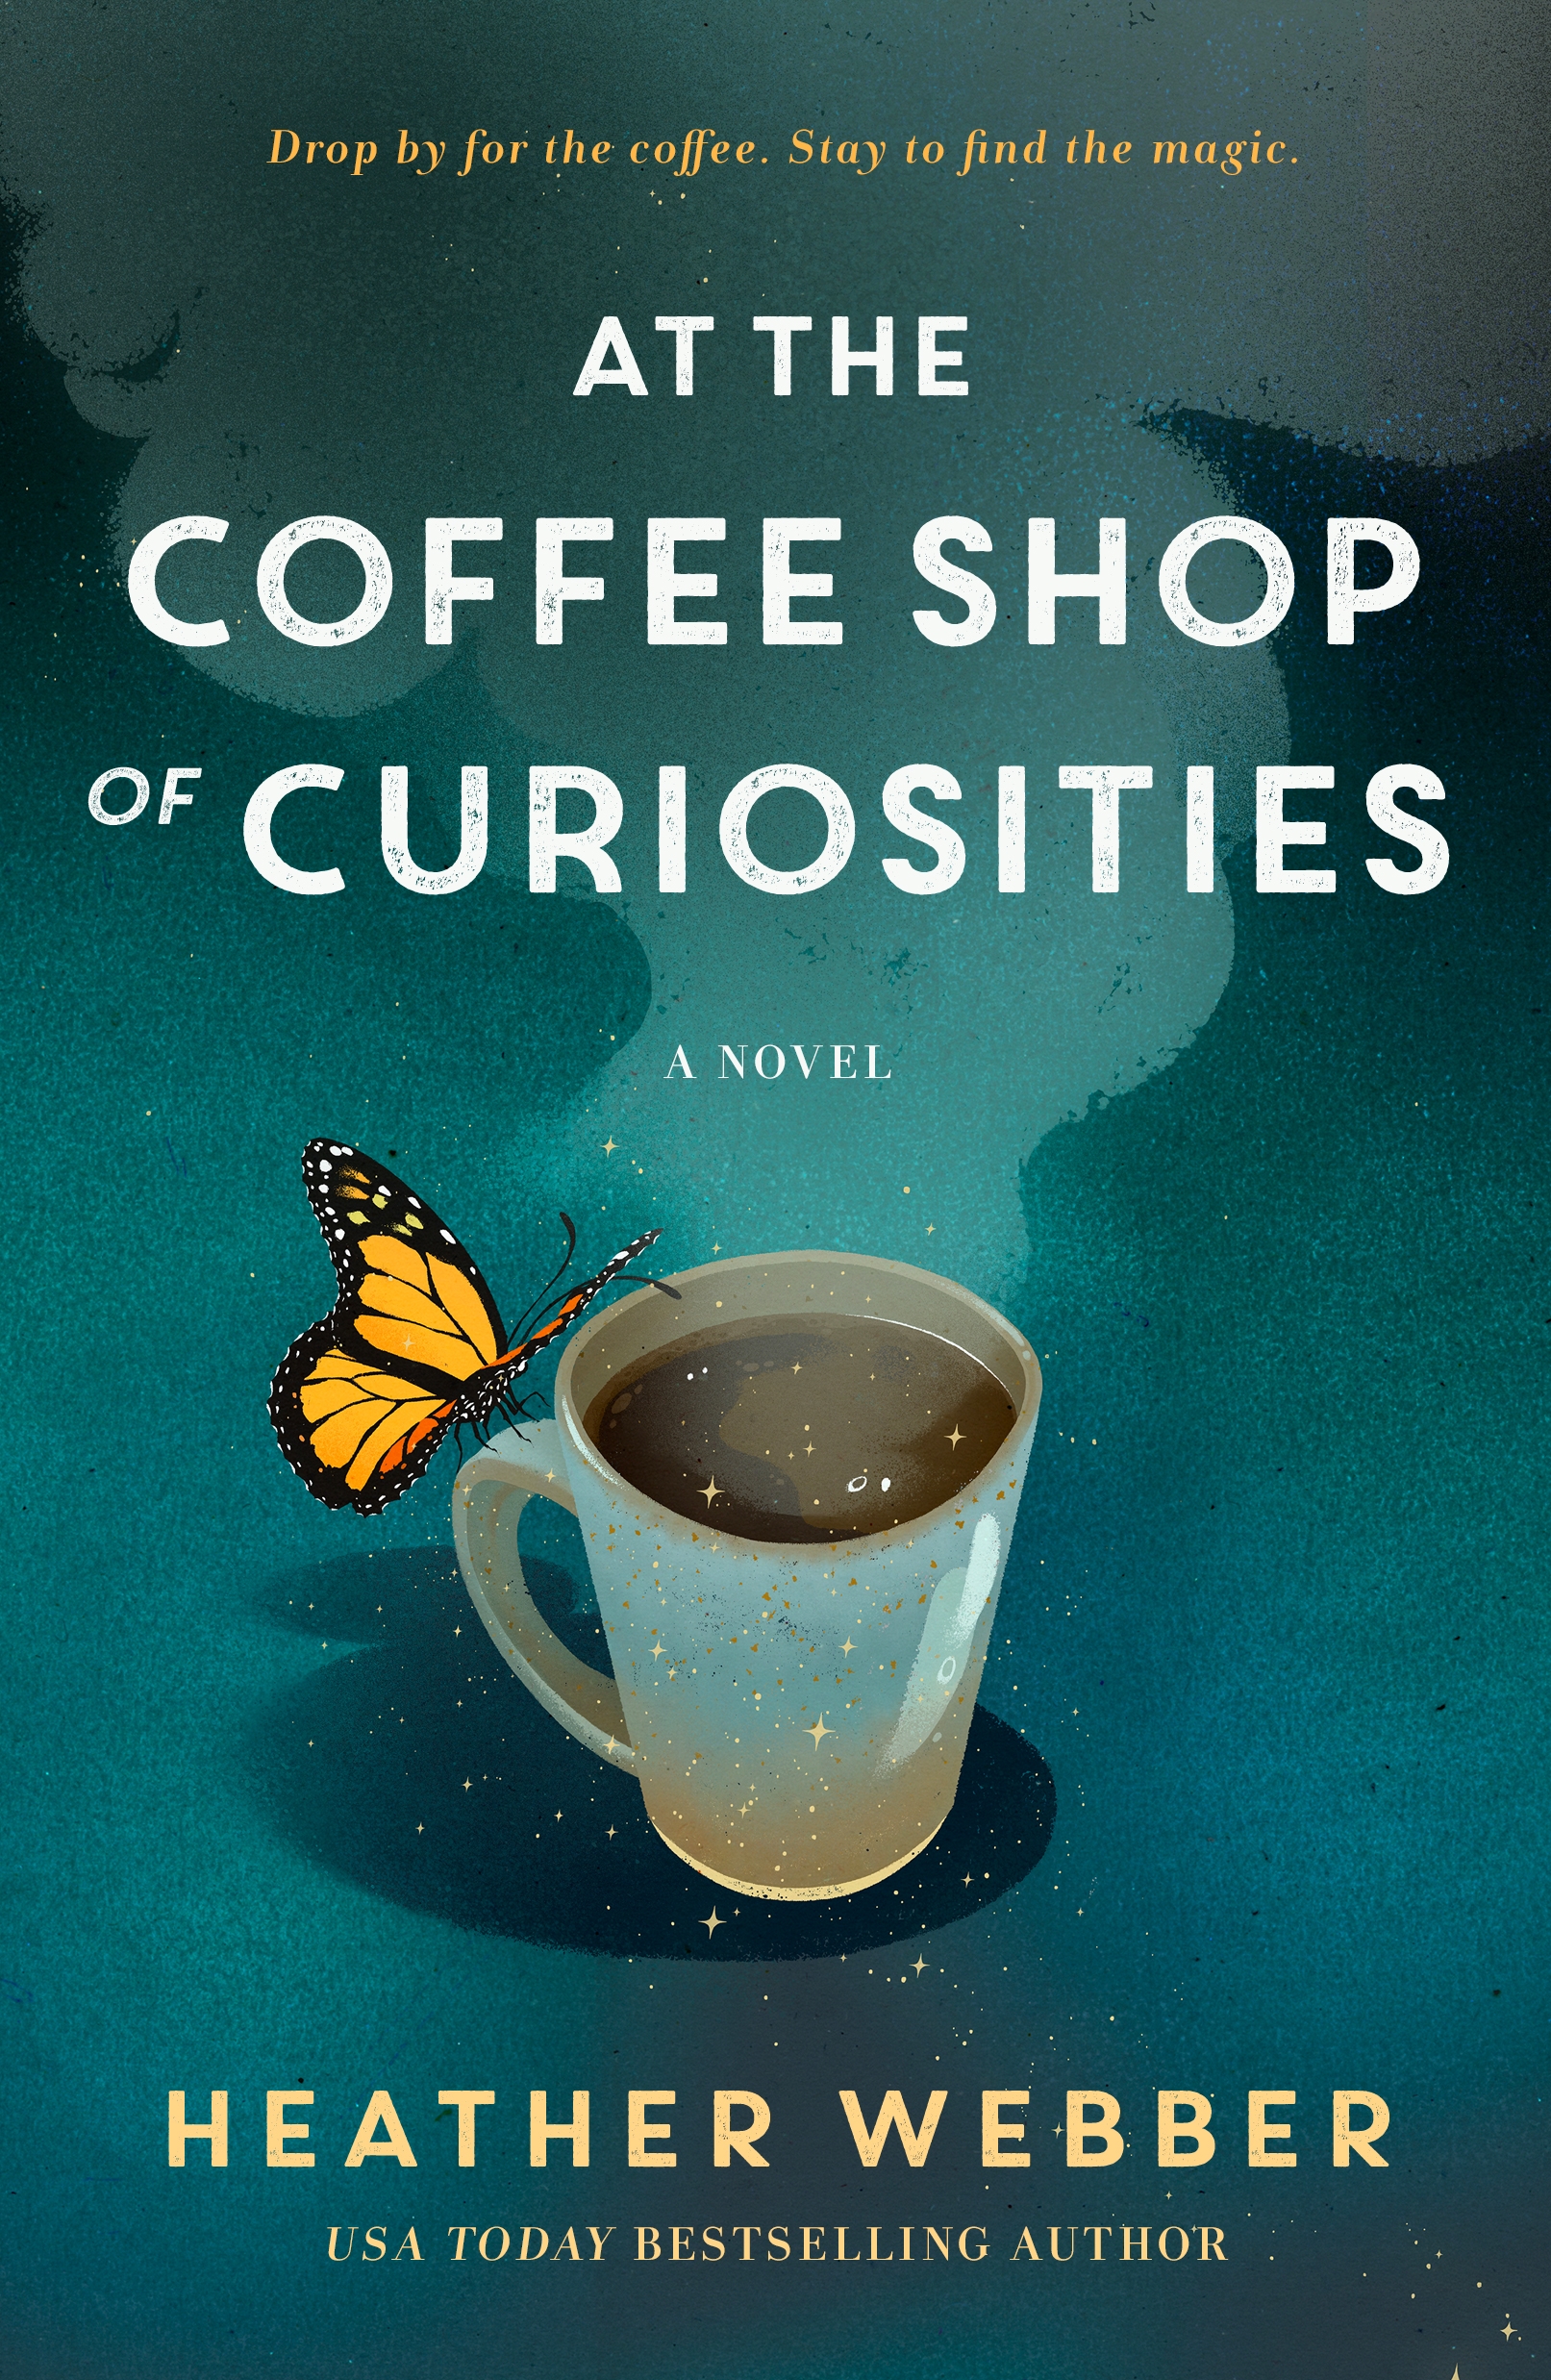 At the Coffee Shop of Curiosities : A Novel by Heather Webber